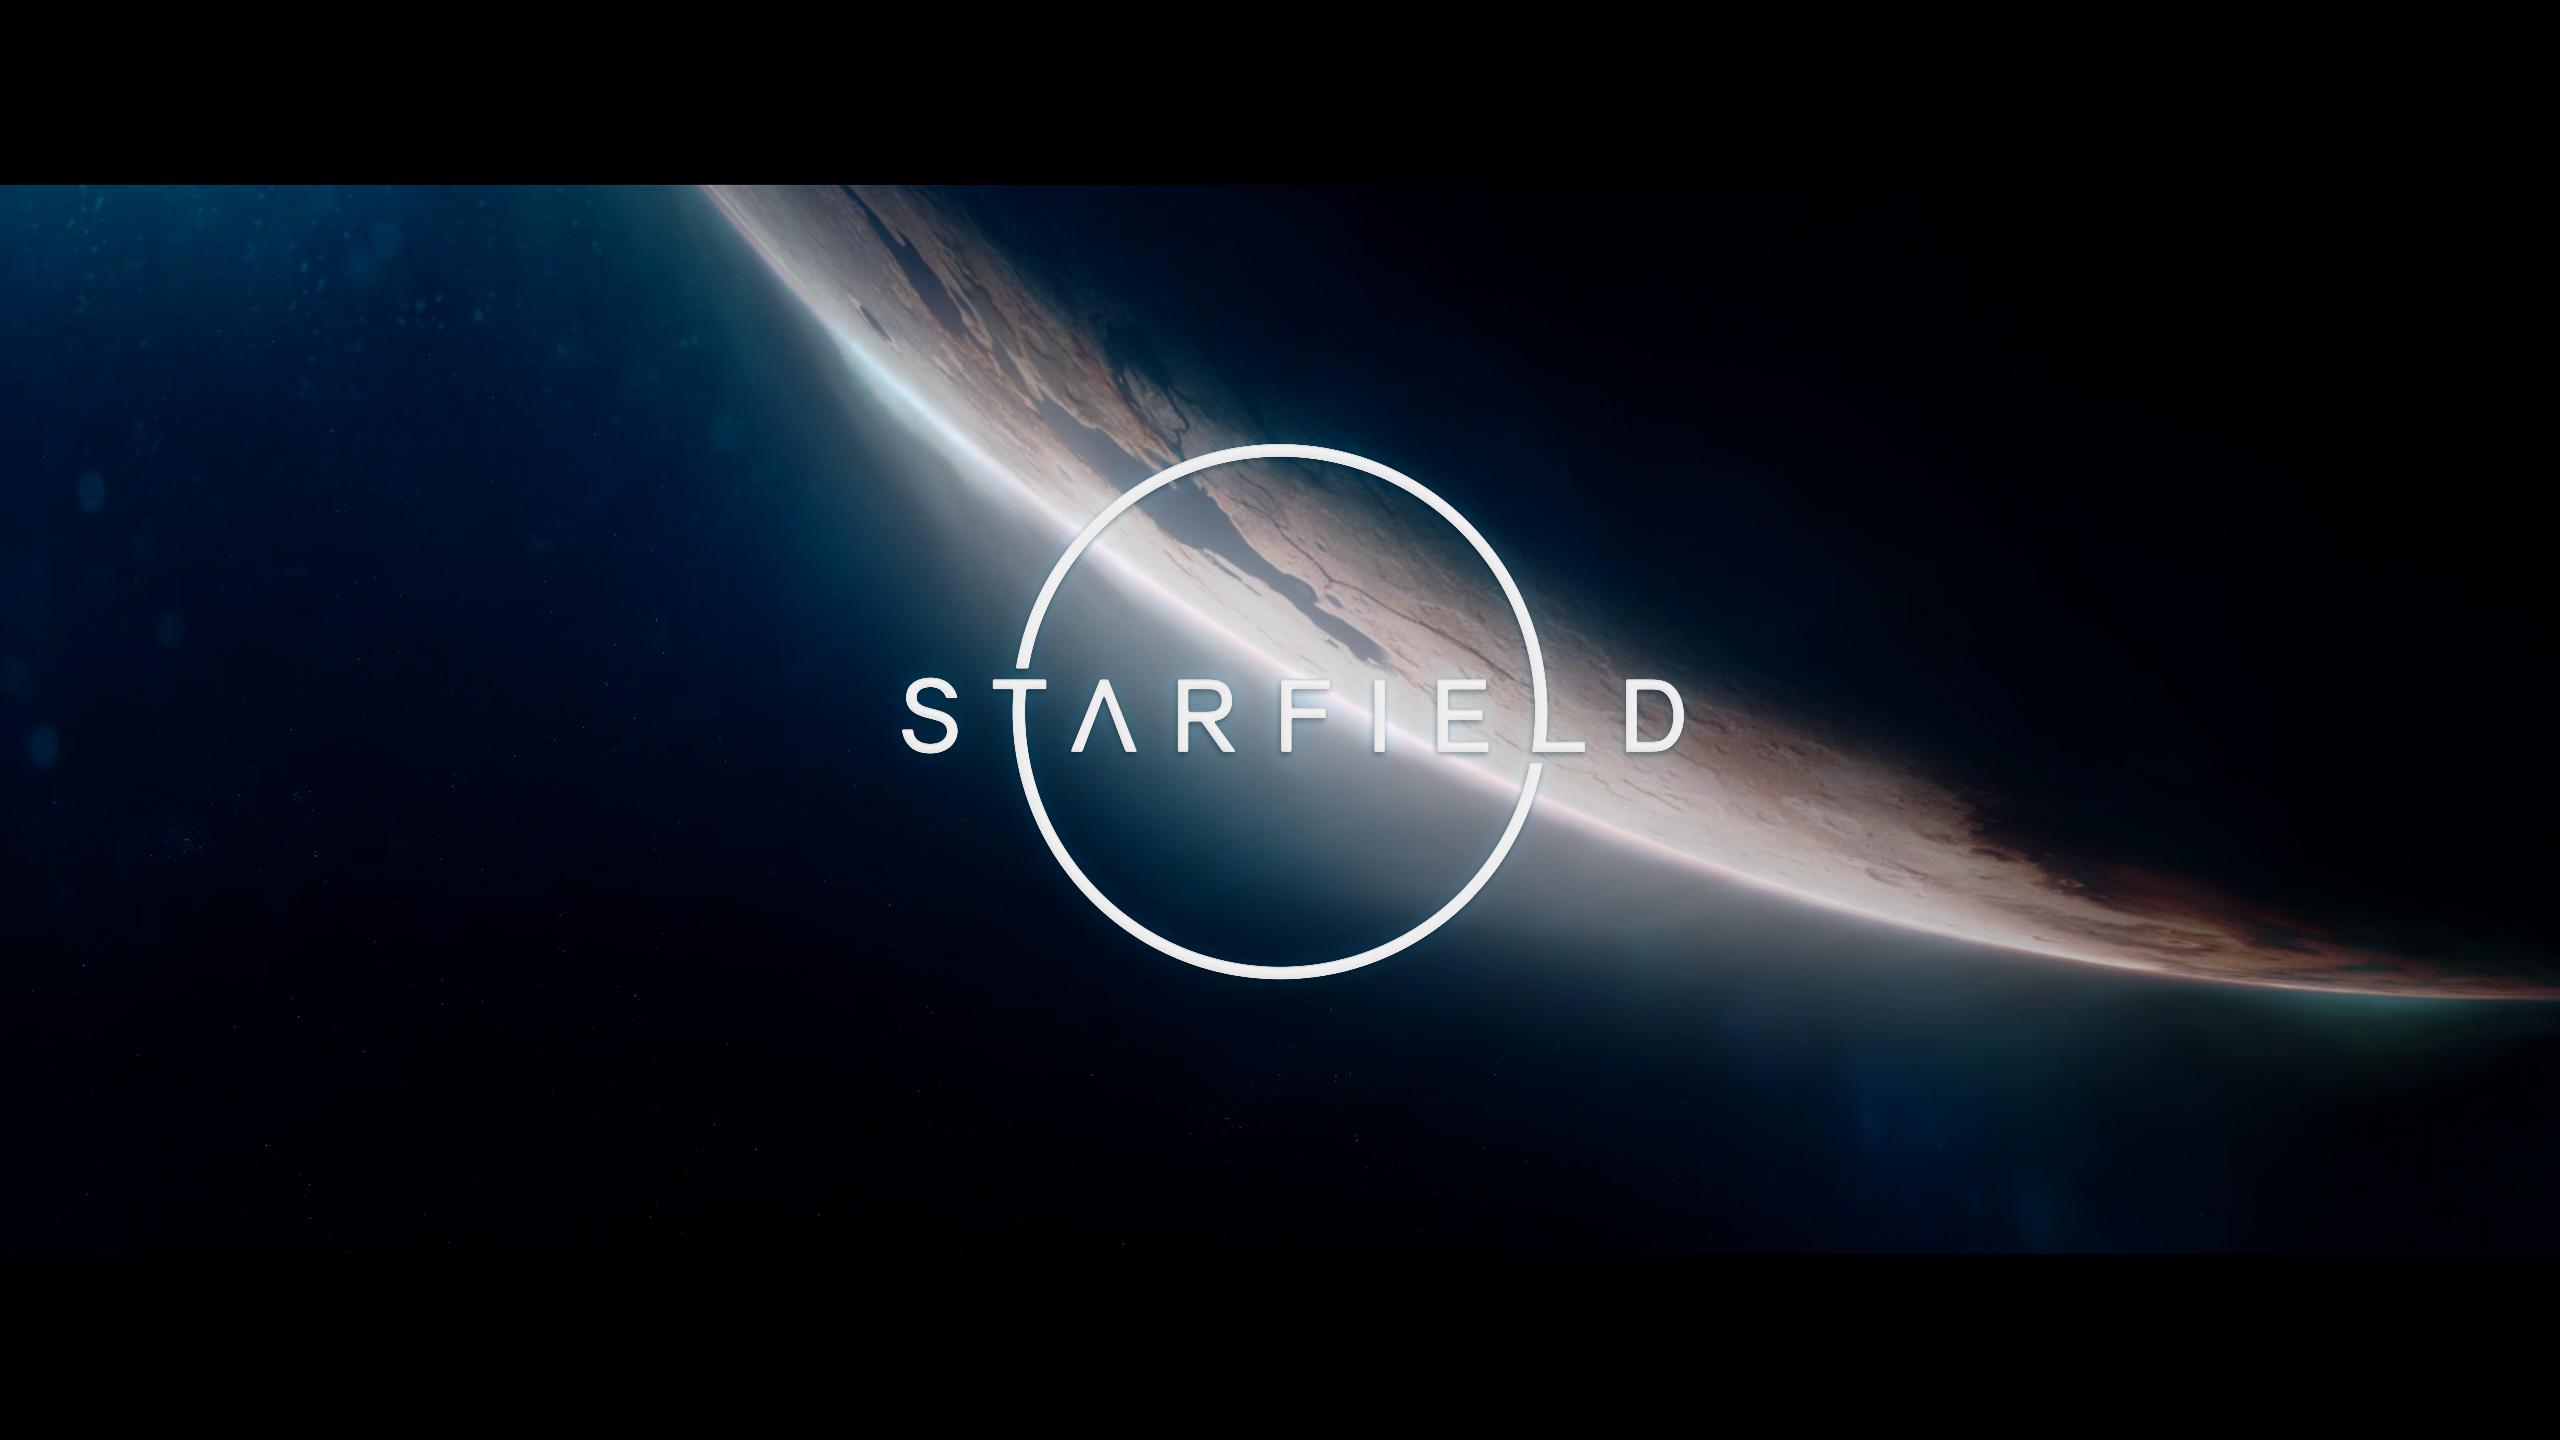 download the new Starfield